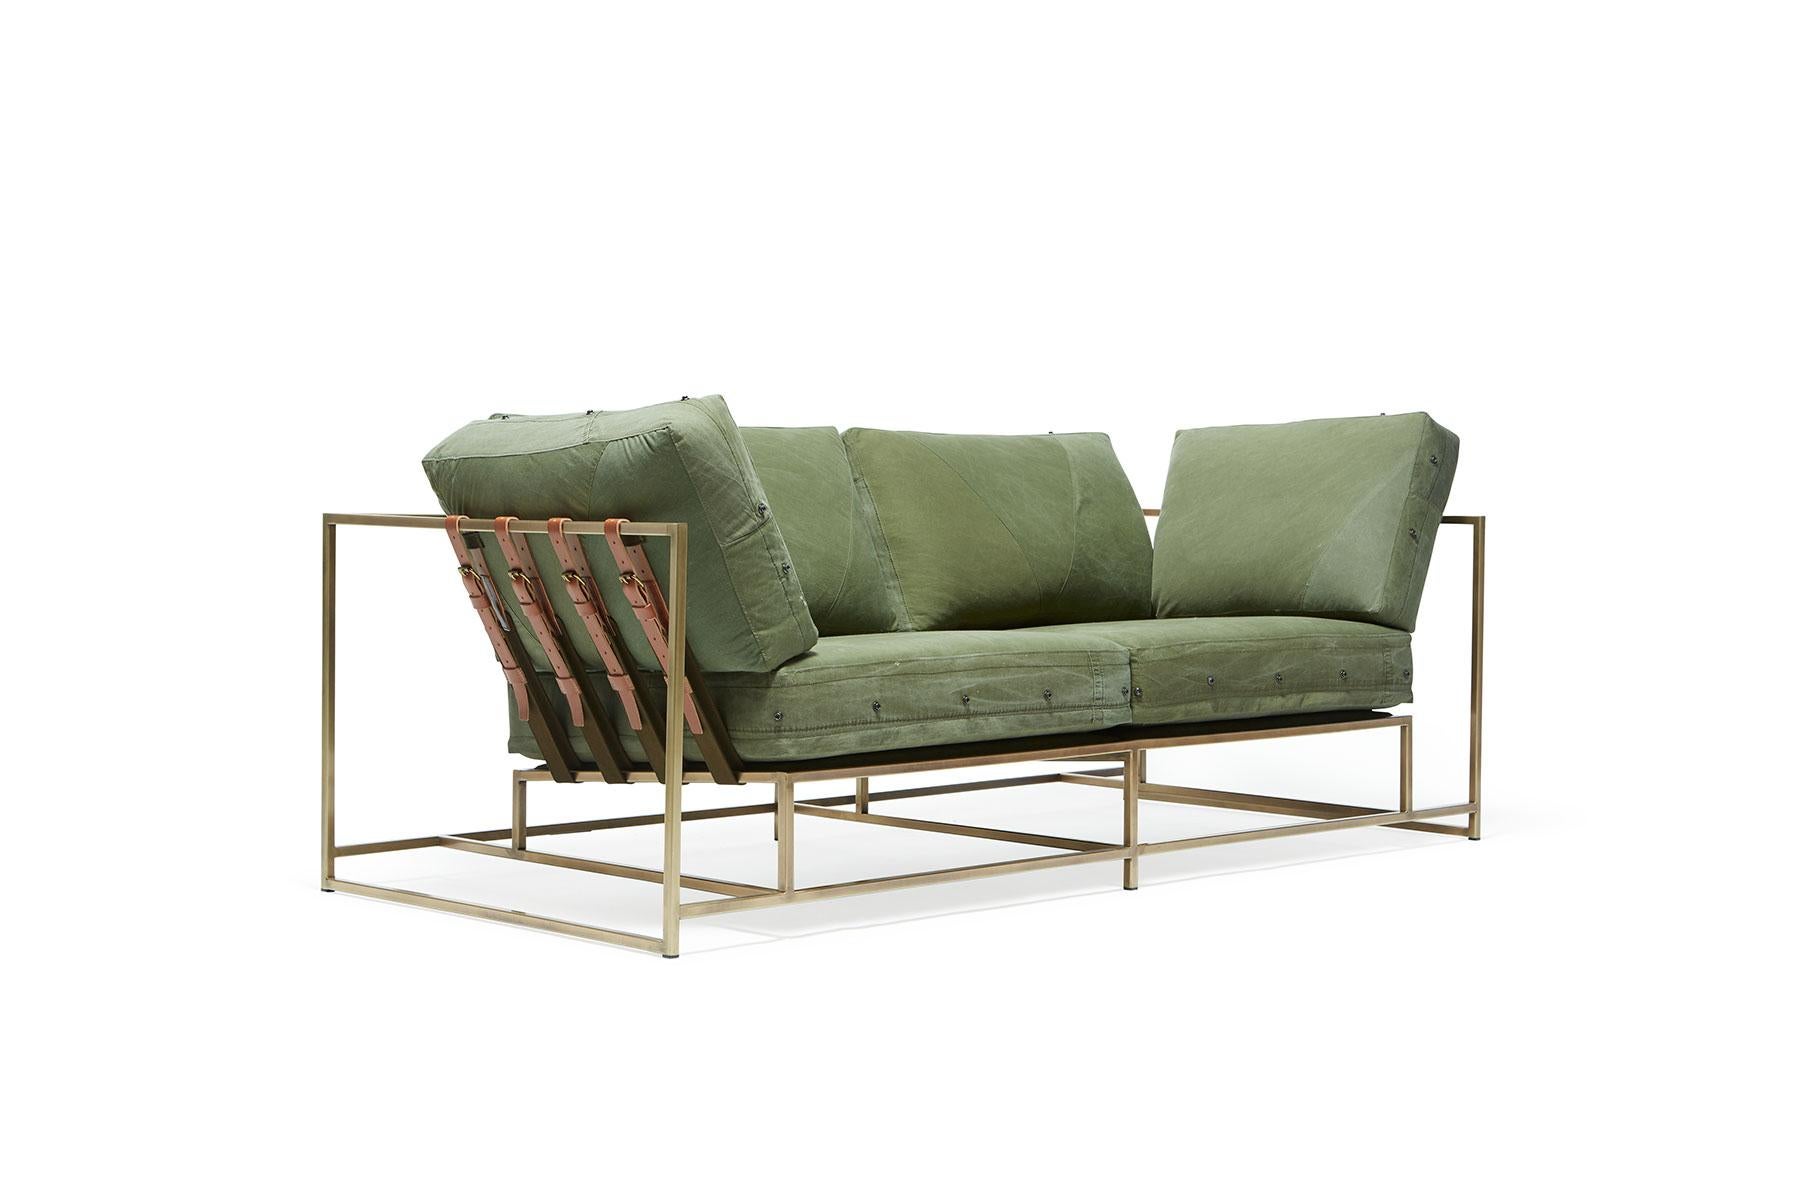 Slightly smaller in size, the two-seat sofa is ideal for apartments or smaller spaces requiring a smaller footprint. The inheritance bench is a versatile piece that can be used as a chaise extension on any sofa, as an independent seating option or